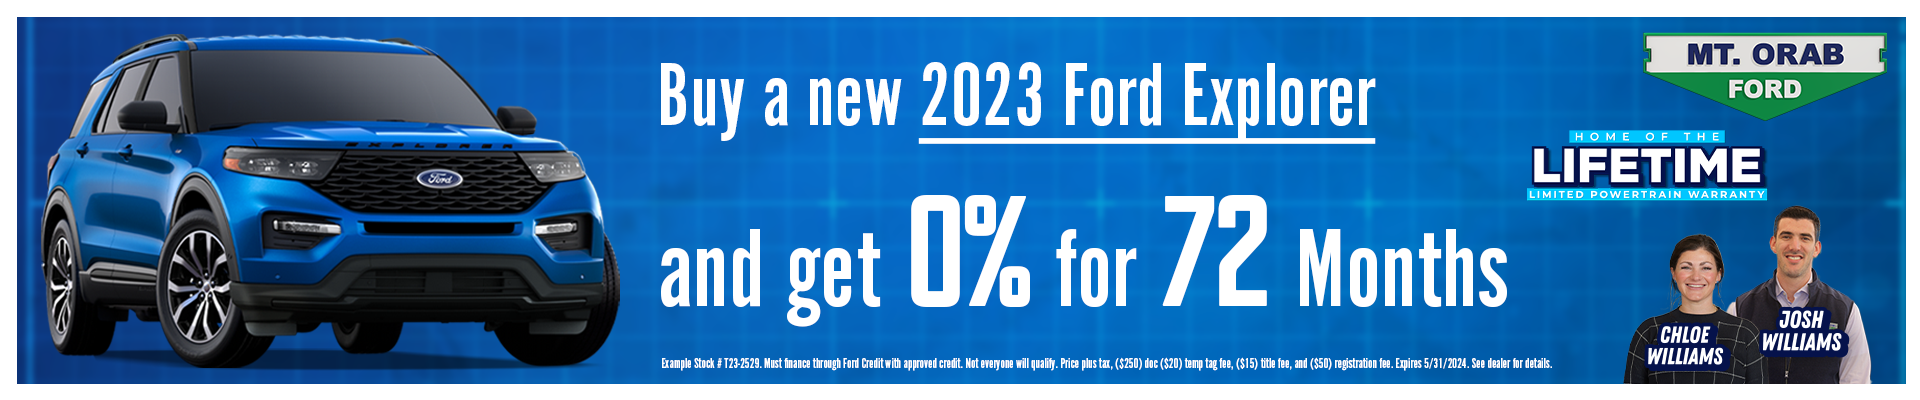 Mt Orab Ford Inc | Low Interest Rates